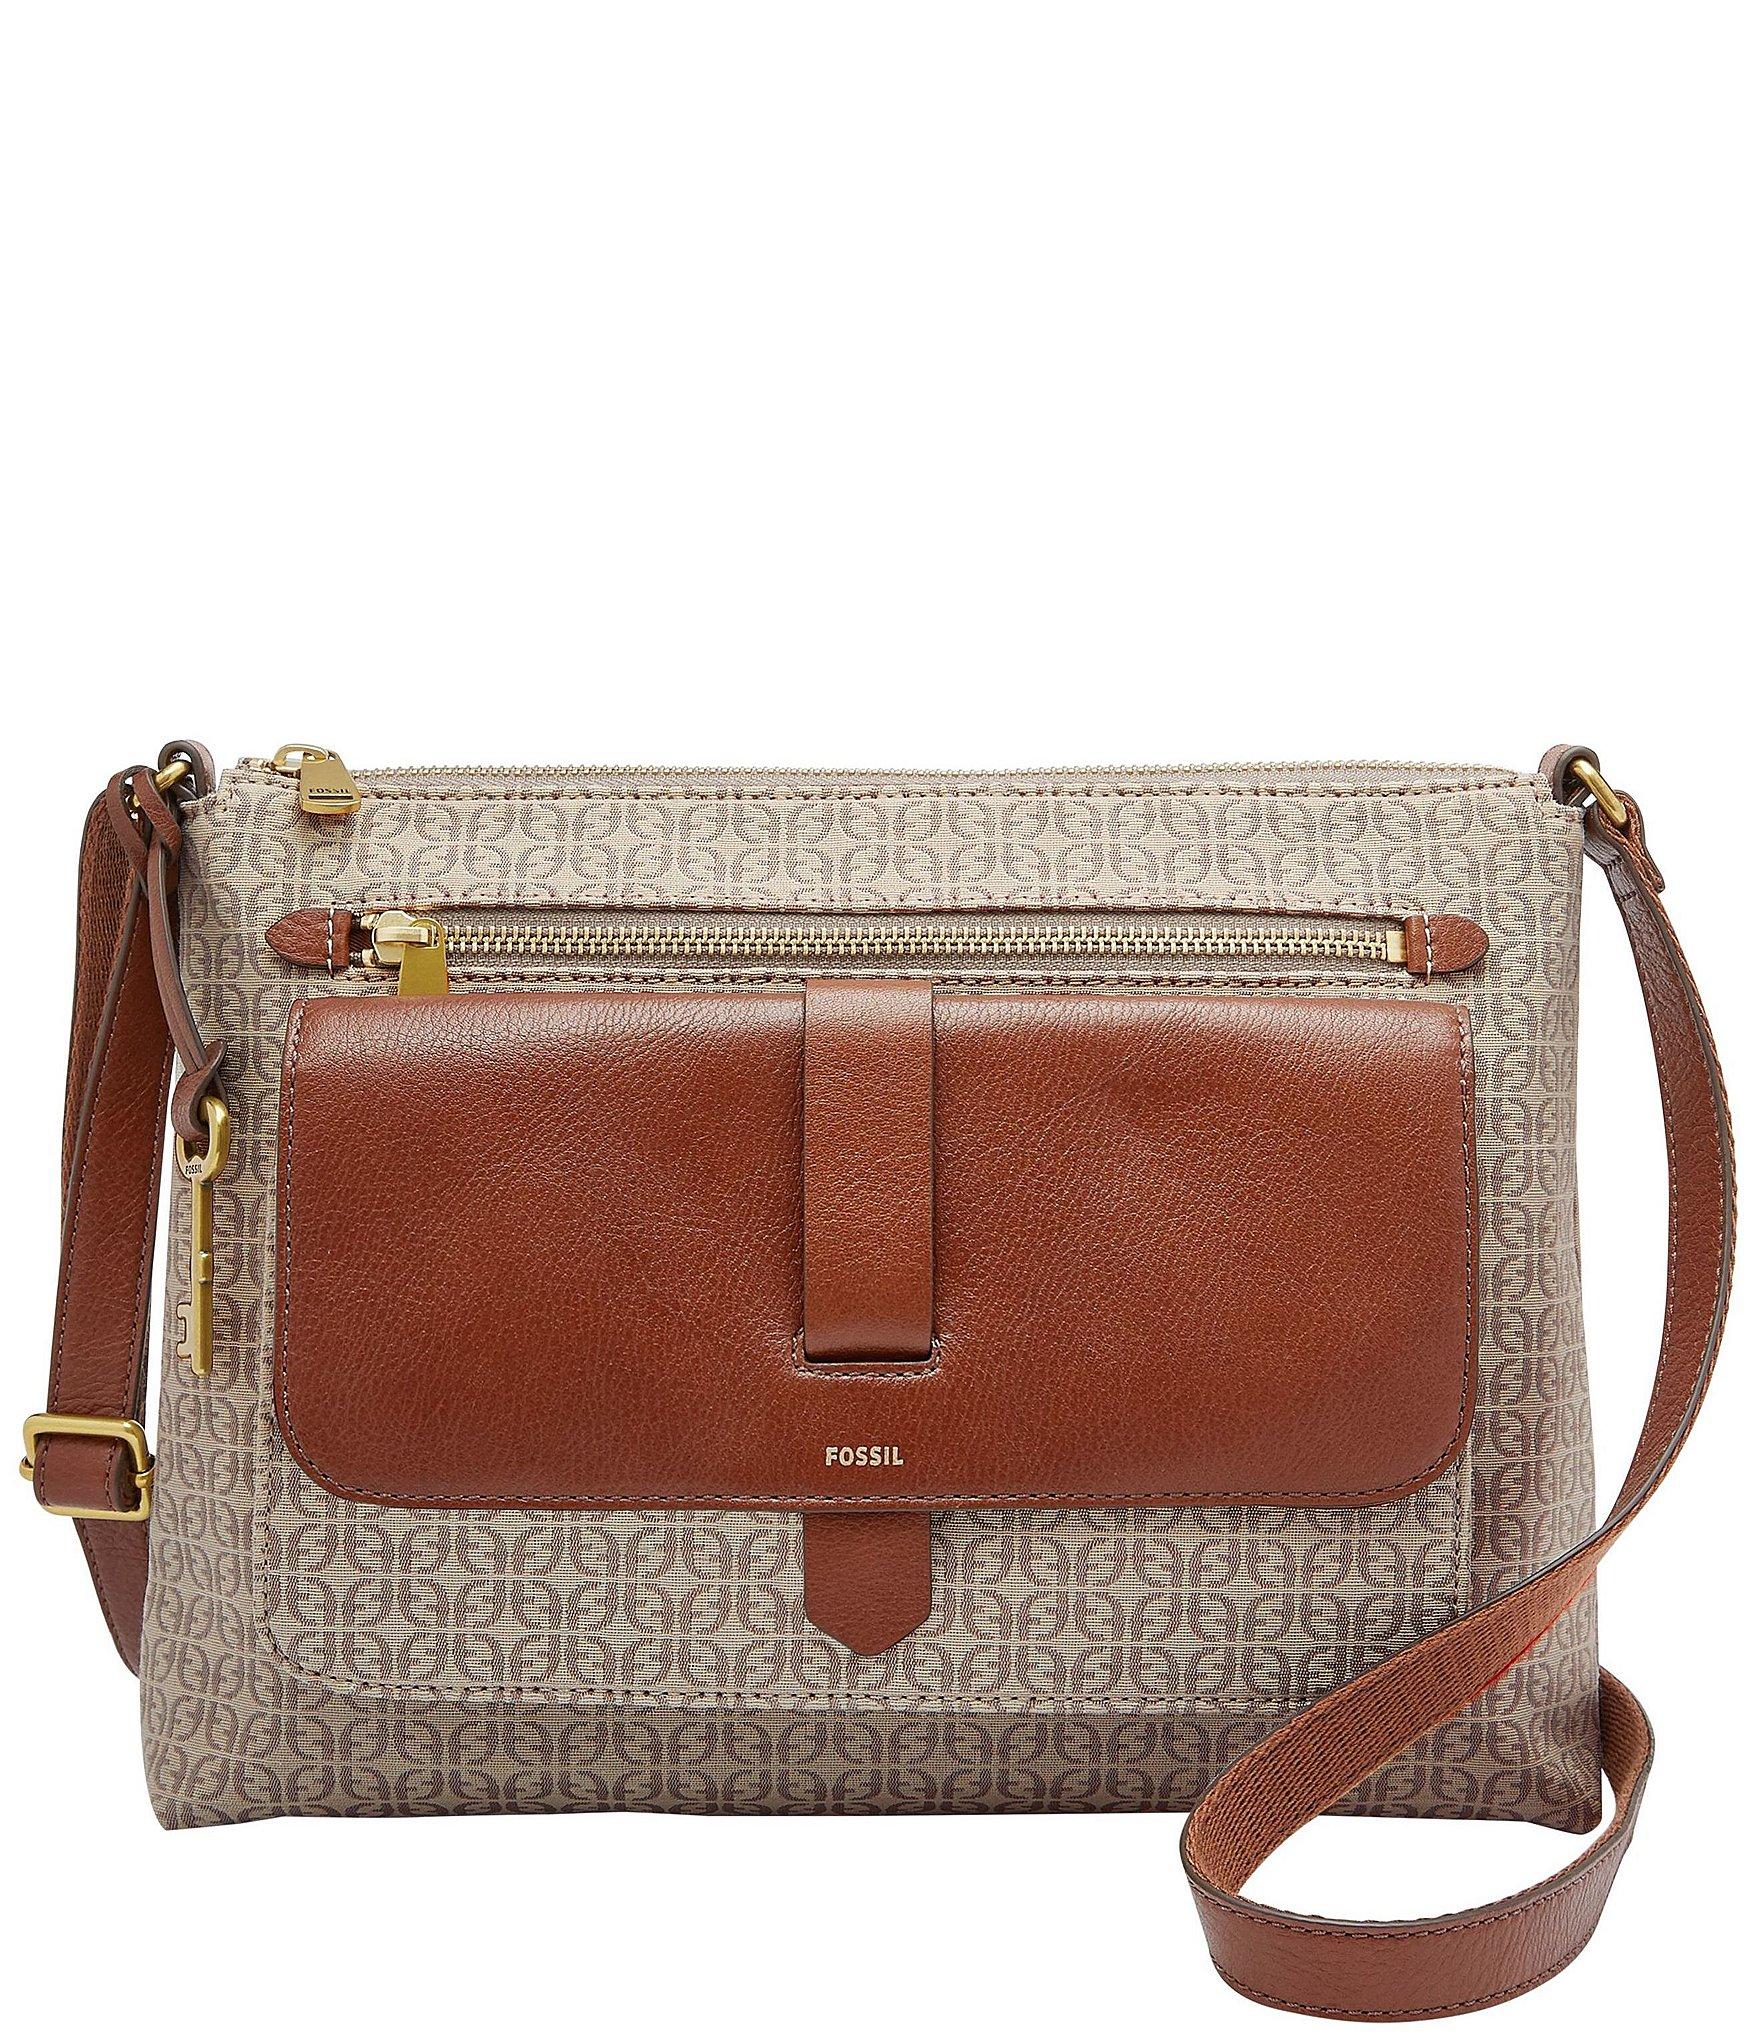 Fossil Kinley Medium Printed Crossbody in Taupe/Tan/Gold (Brown) - Lyst